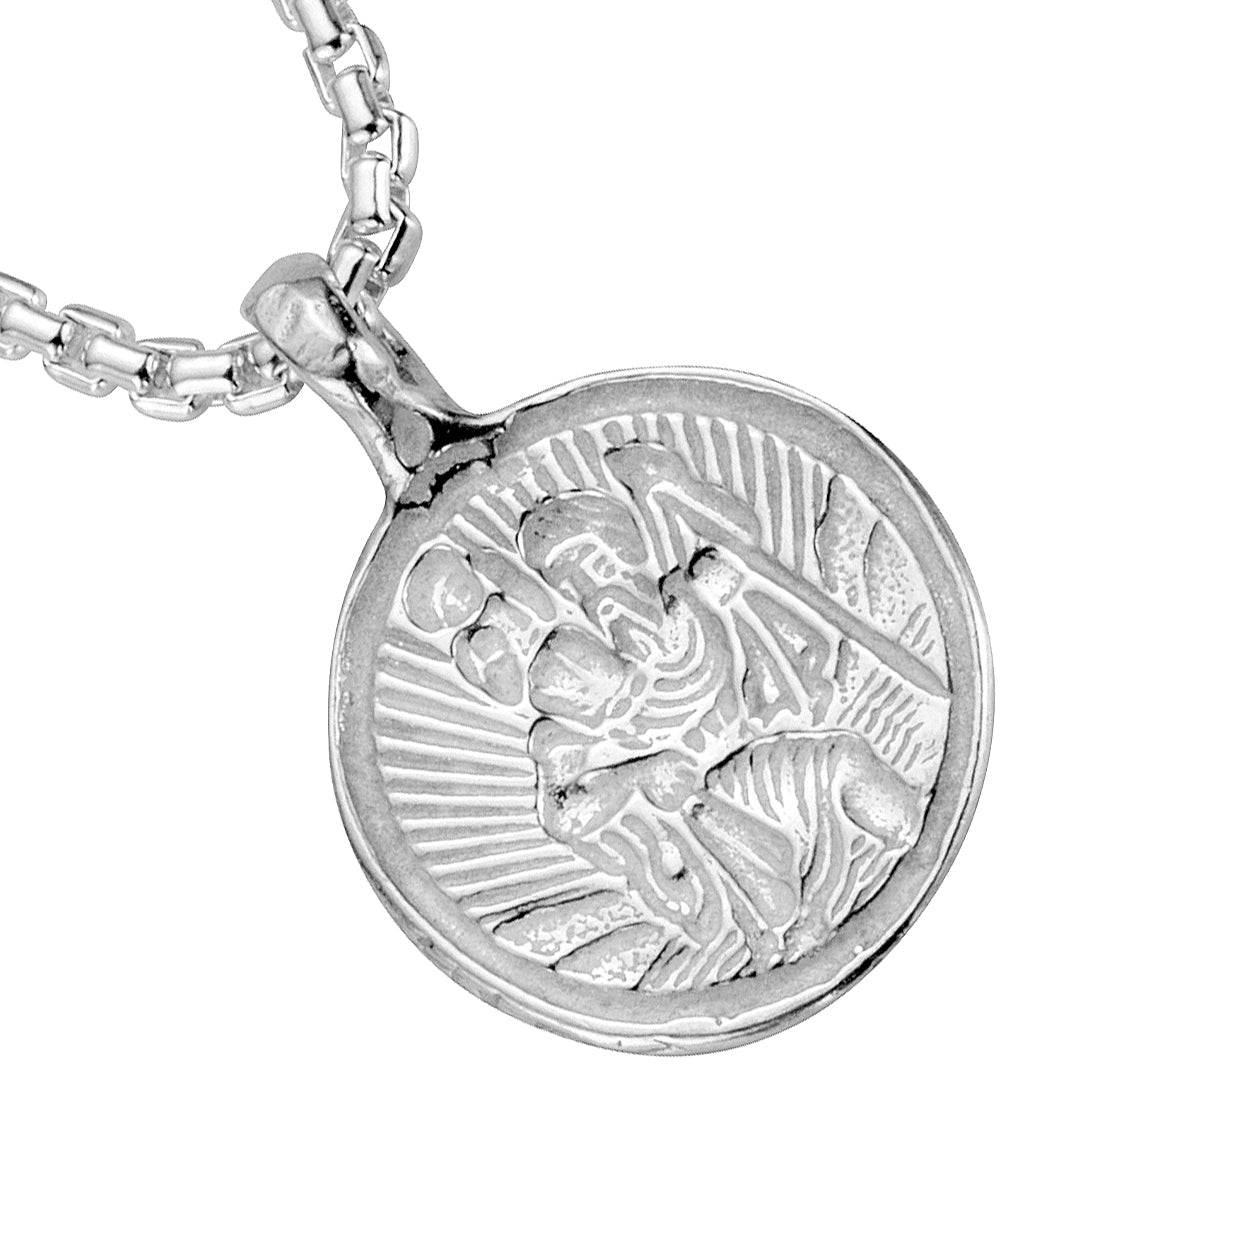 Silver Medium St Christopher Snake Chain Necklace